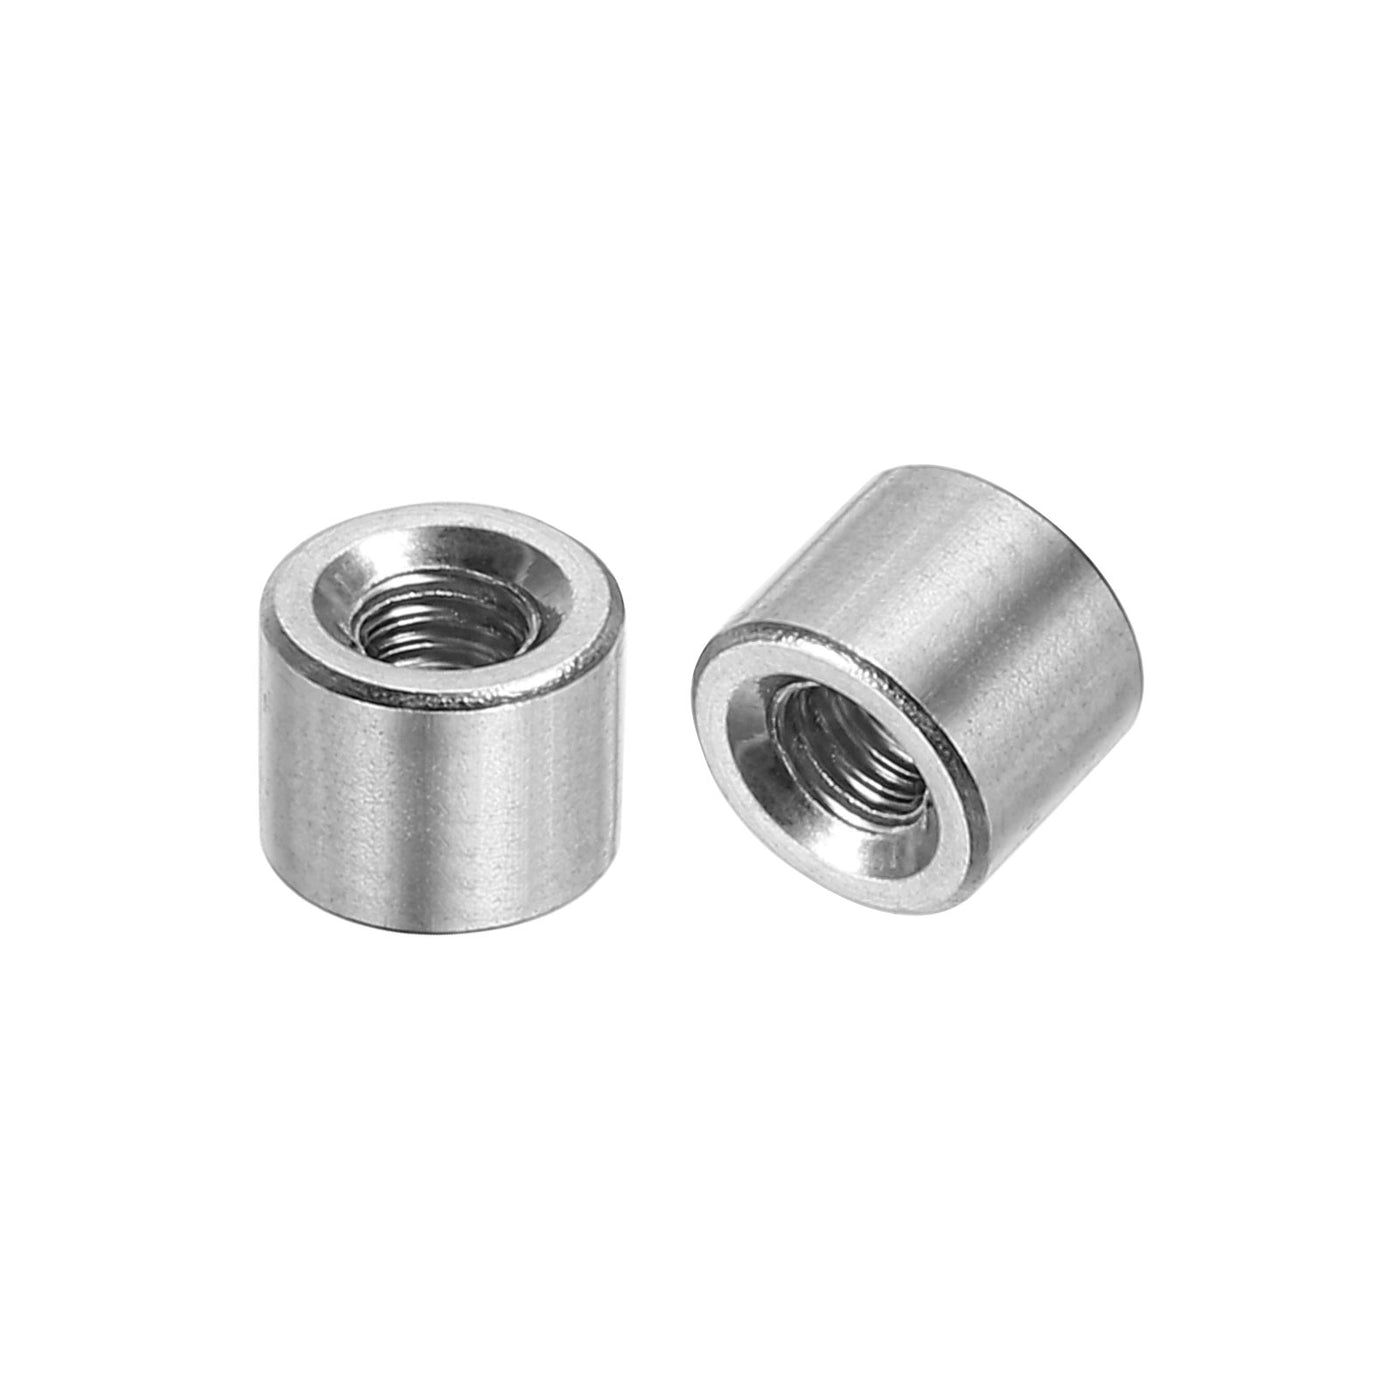 uxcell Uxcell 20Pcs Round Connector Nuts, M4x6x8mm Coupling Nut Sleeve Rod Bar Stud Nut